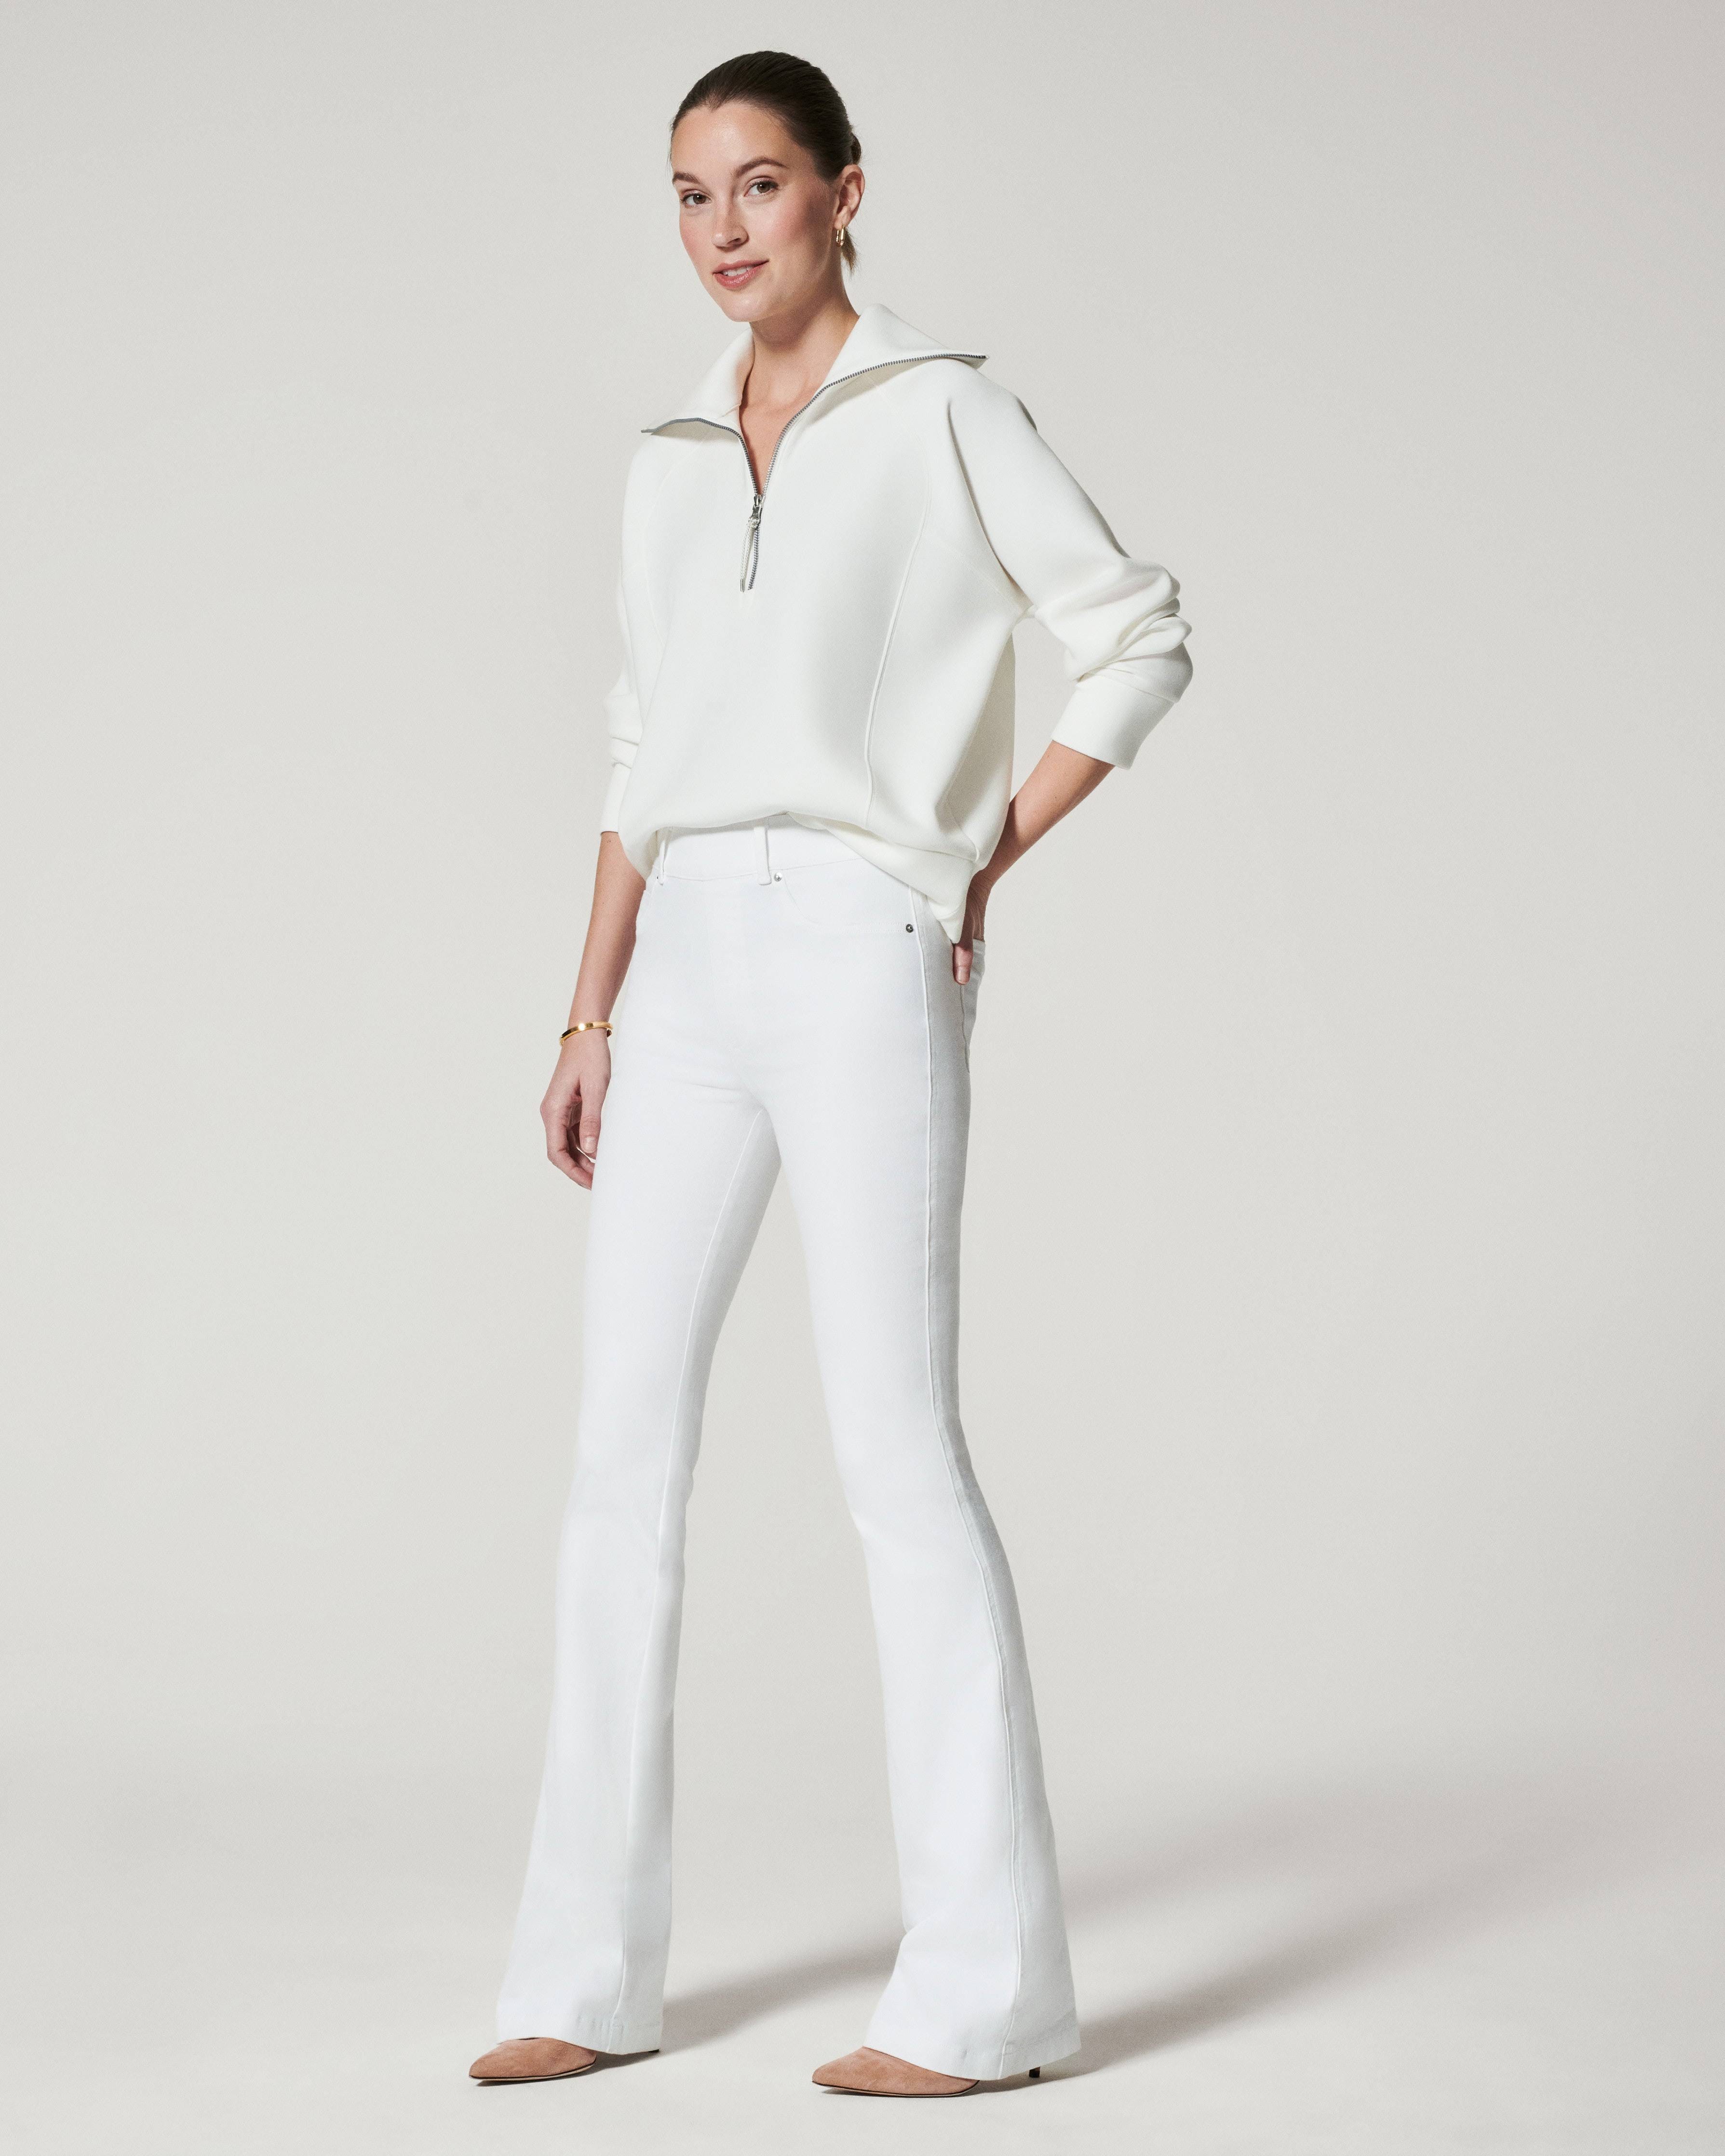 Spanx Flare High-Rise Jeans in White - Best White Jeans for Women | Image